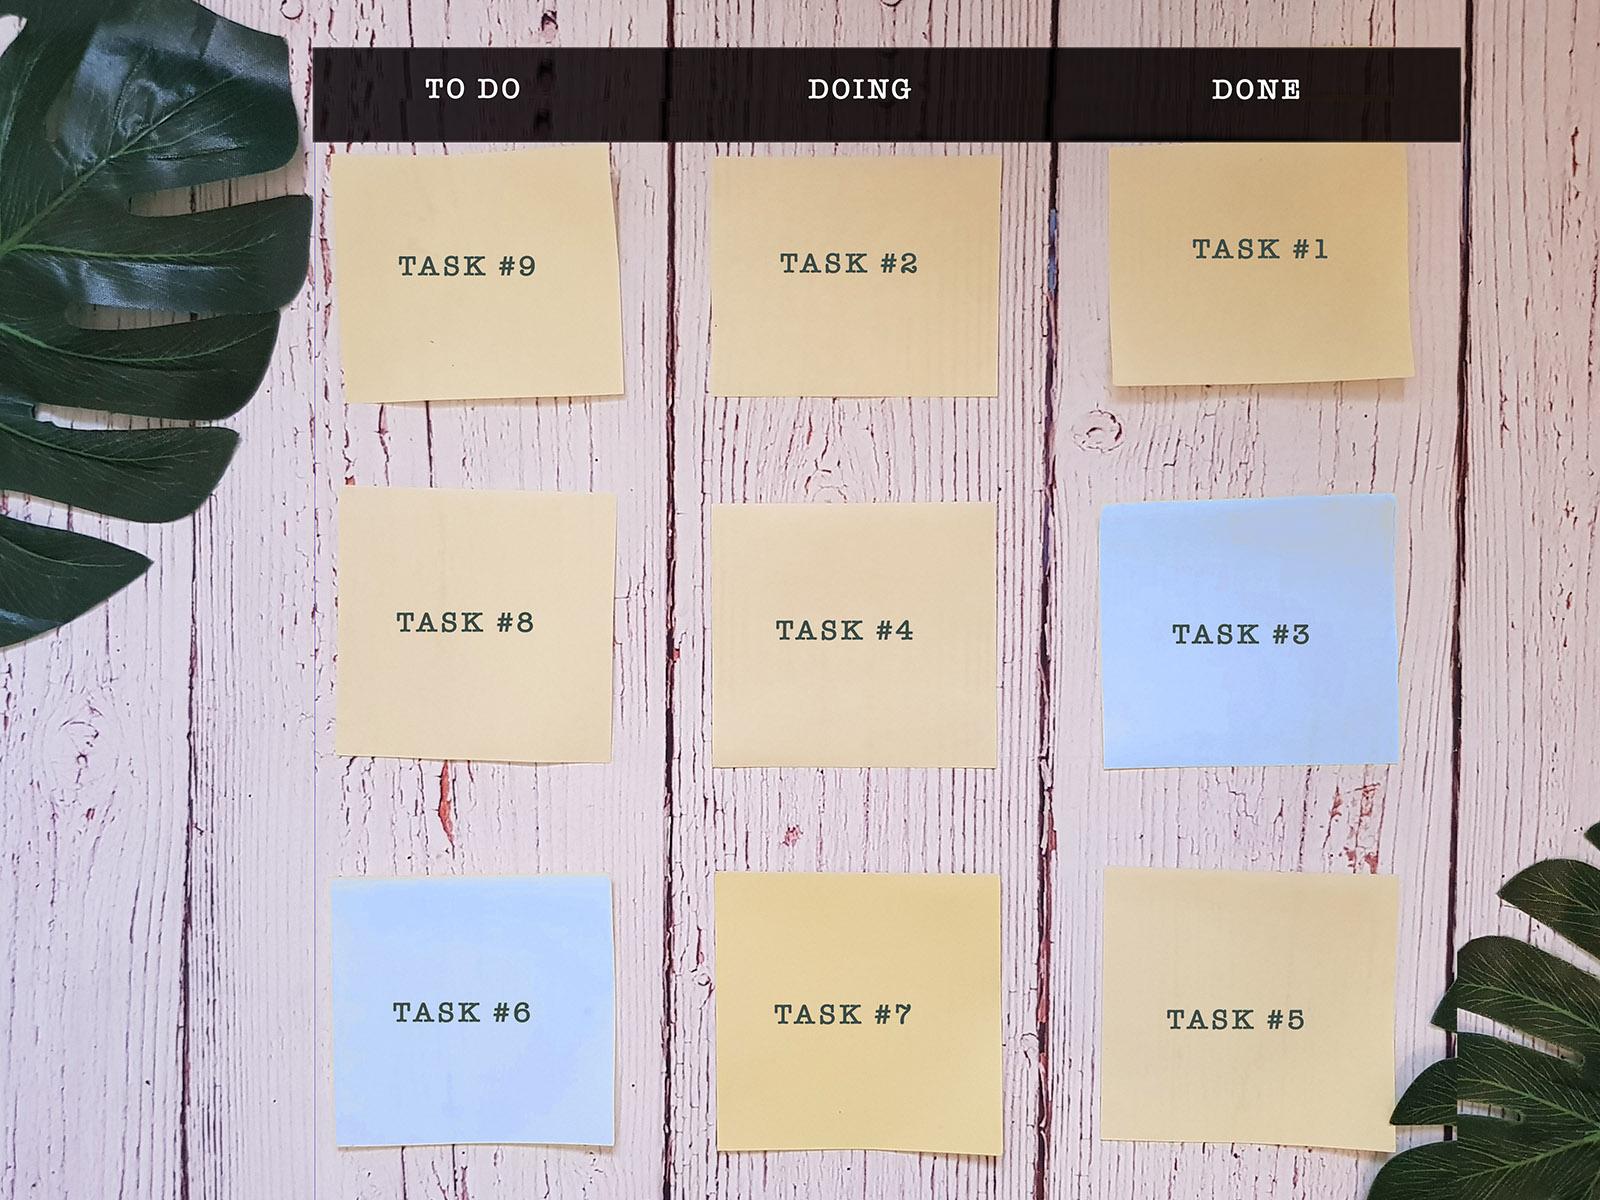 Kanban Board - TO DO, DOING, DONE